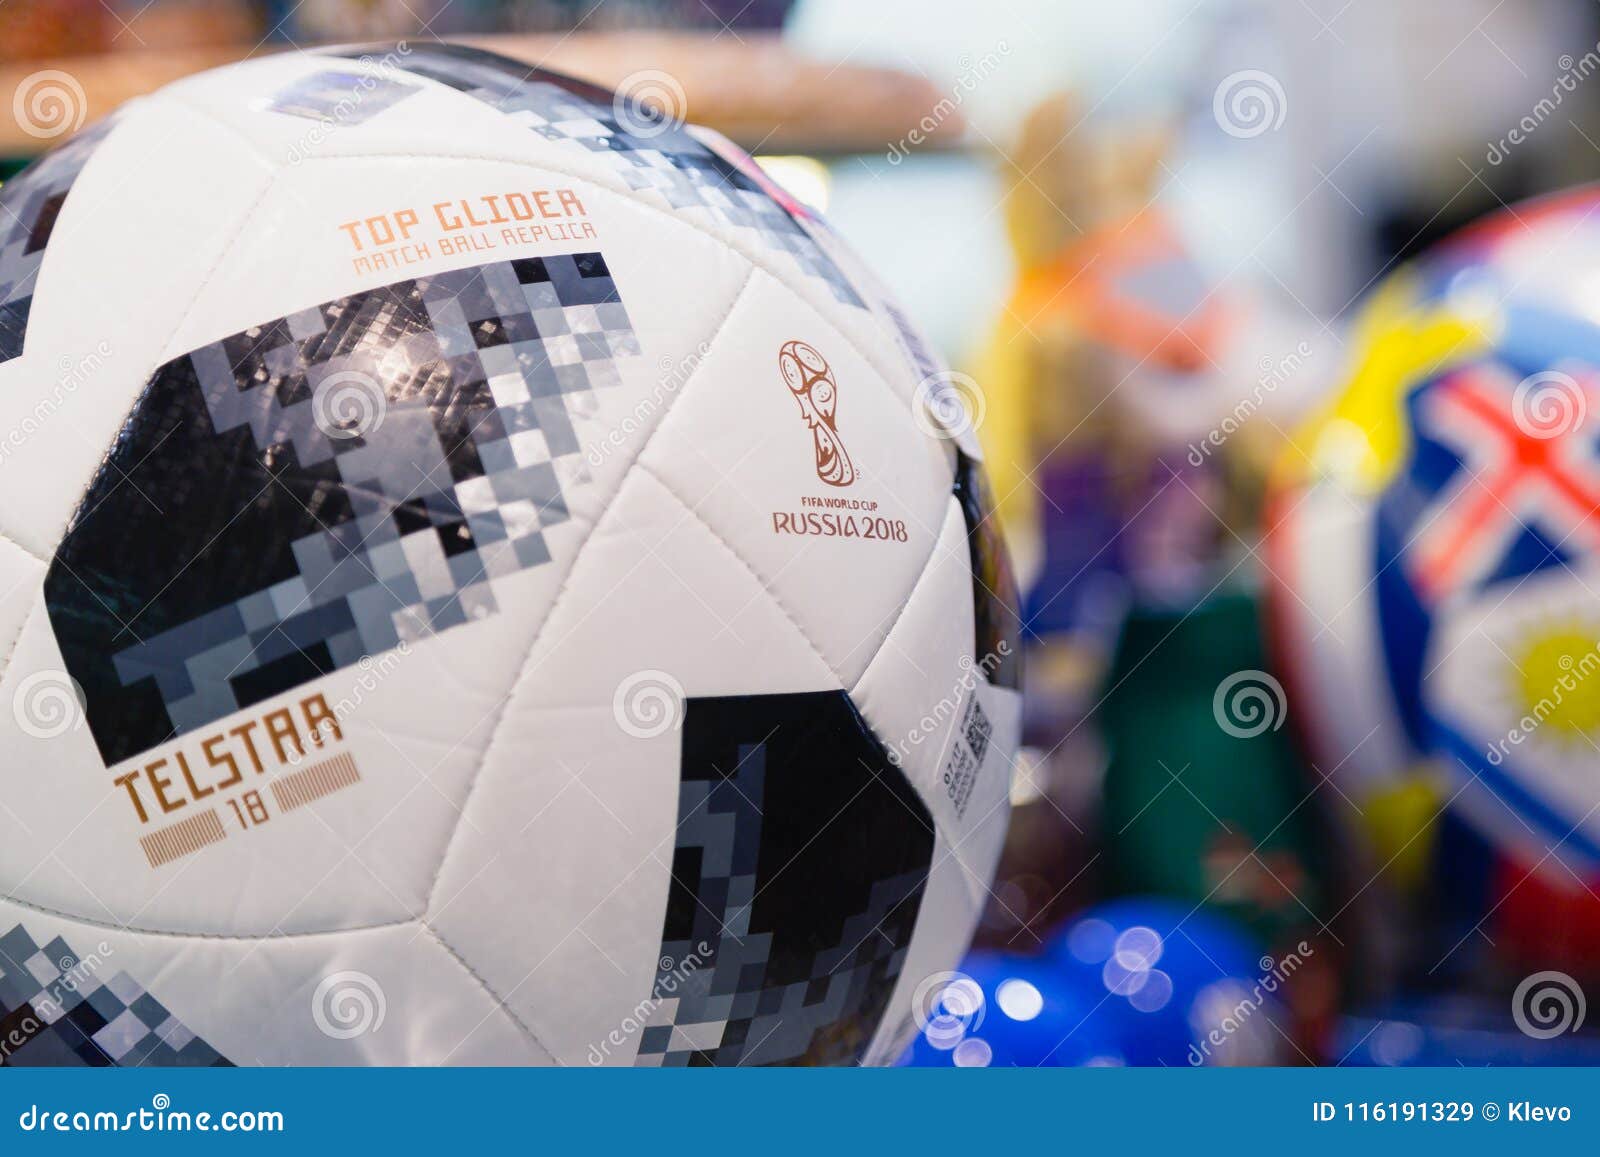 MOSCOW, RUSSIA - APRIL 30, 2018: TOP GLIDER Match Ball Replica for Cup FIFA 2018 Mundial in the Souvenir Shop. Editorial Stock Image - Image of emblem: 116191329